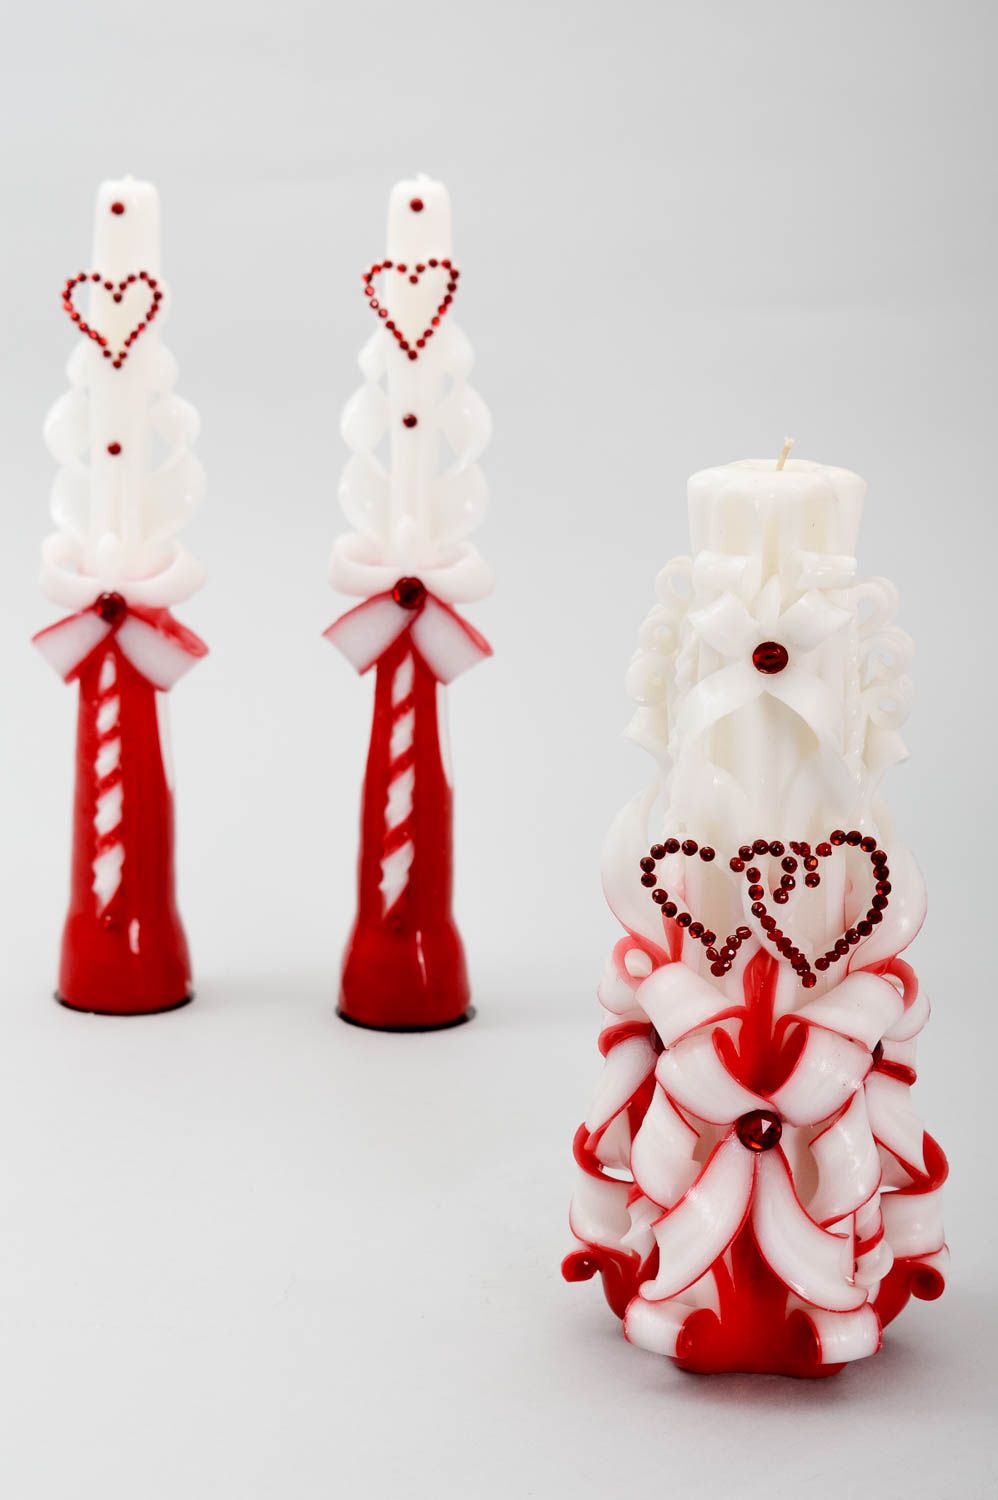 Carved handmade candles wedding candles handmade gifts home decor ideas photo 2